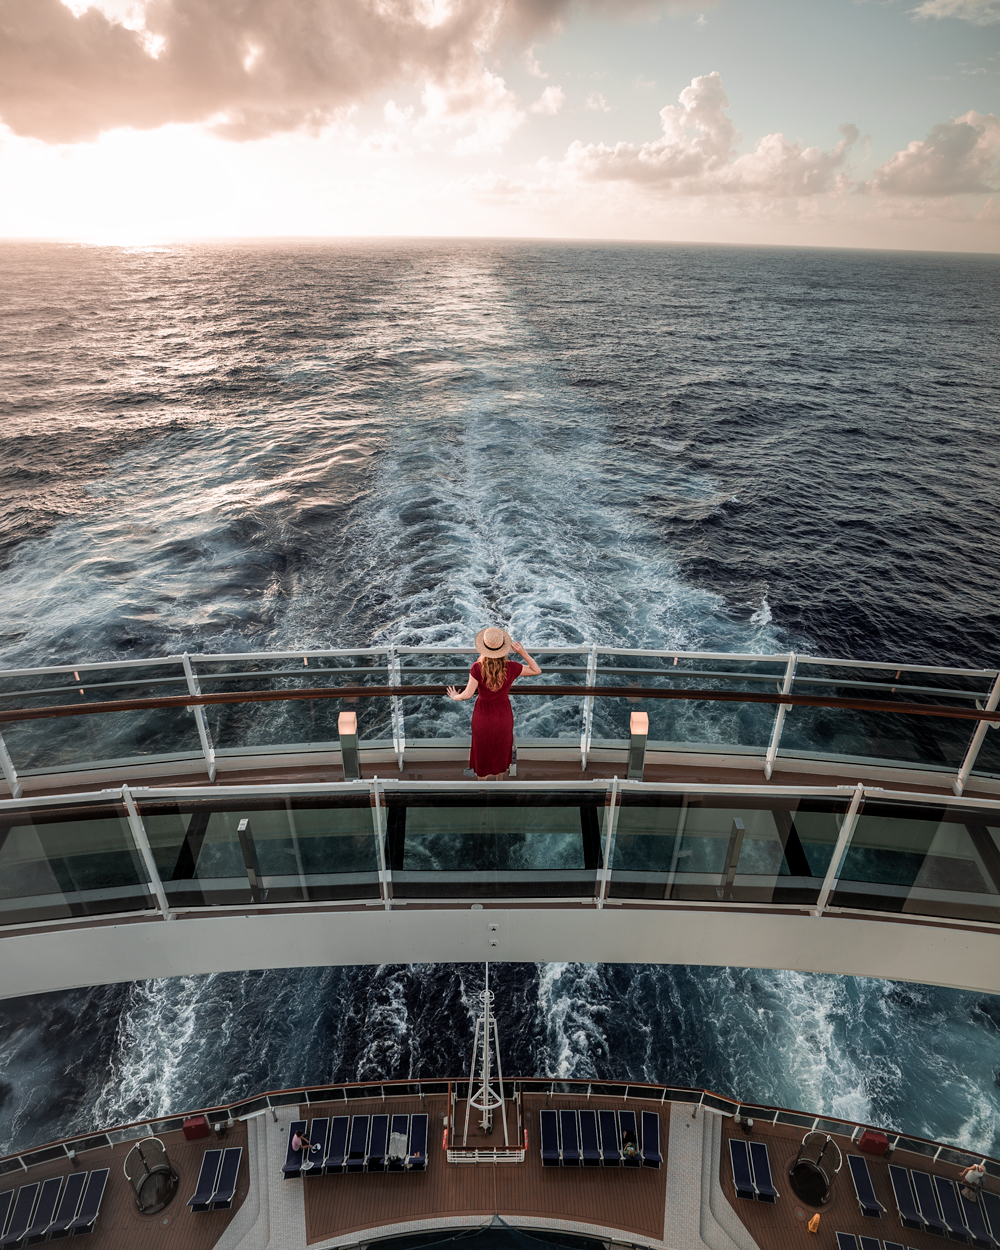 6 Reasons Why You Should Book an MSC Seaside Cruise Right Now!